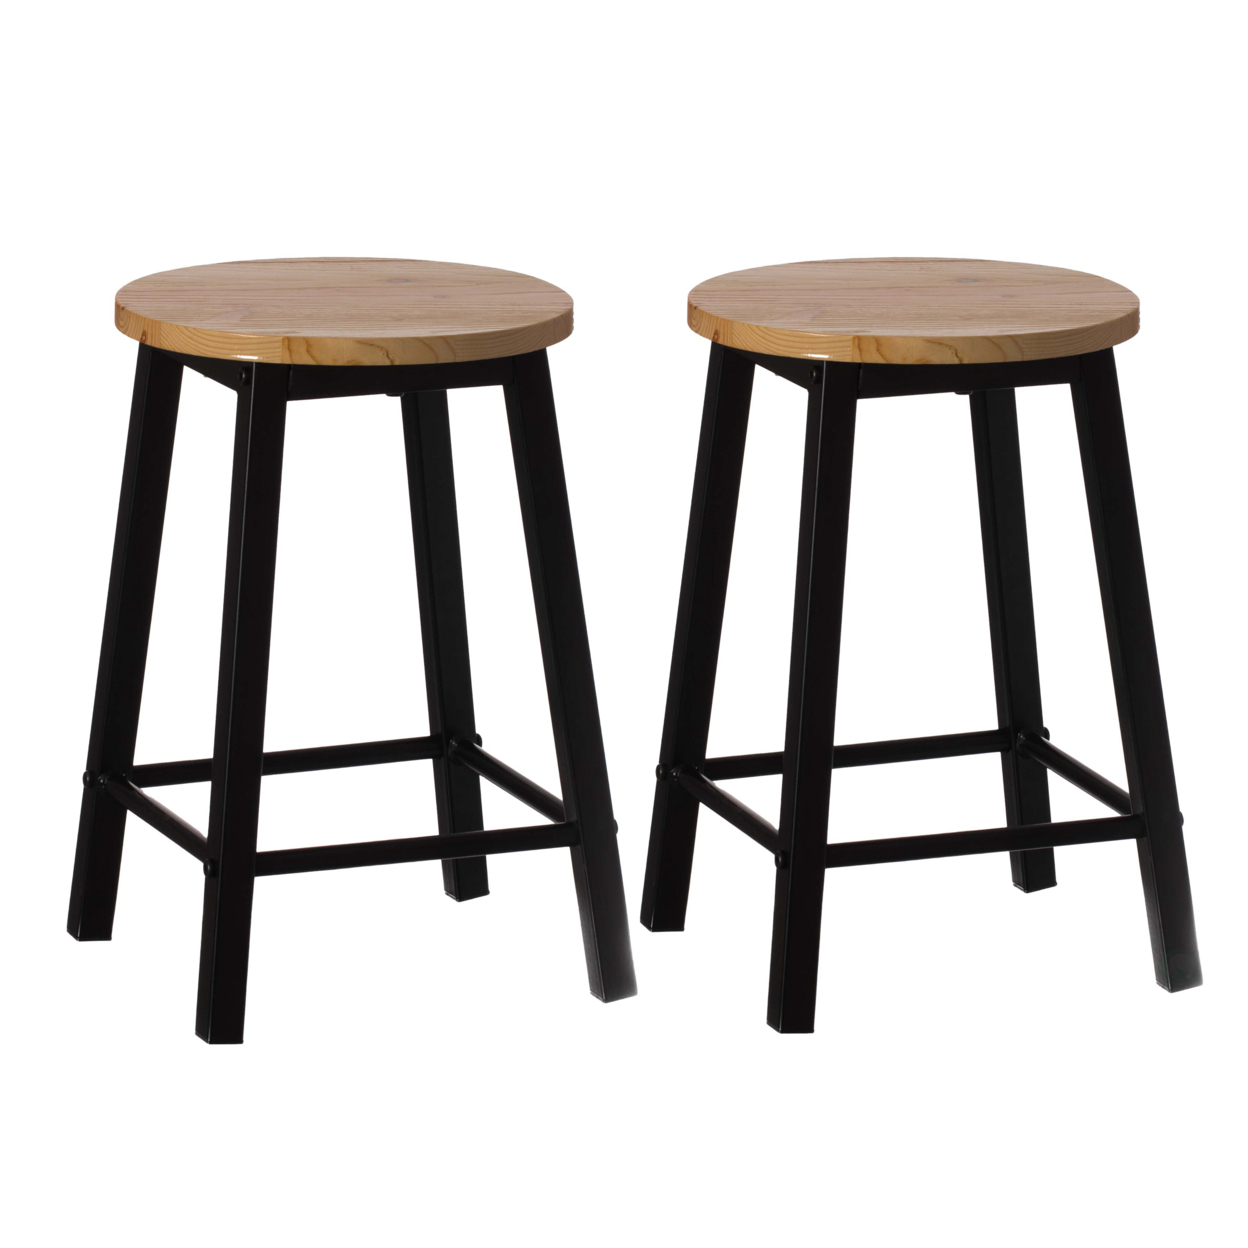 17.5 High Wooden Black Round Bar Stool With Footrest For Indoor And Outdoor - Set Of 2